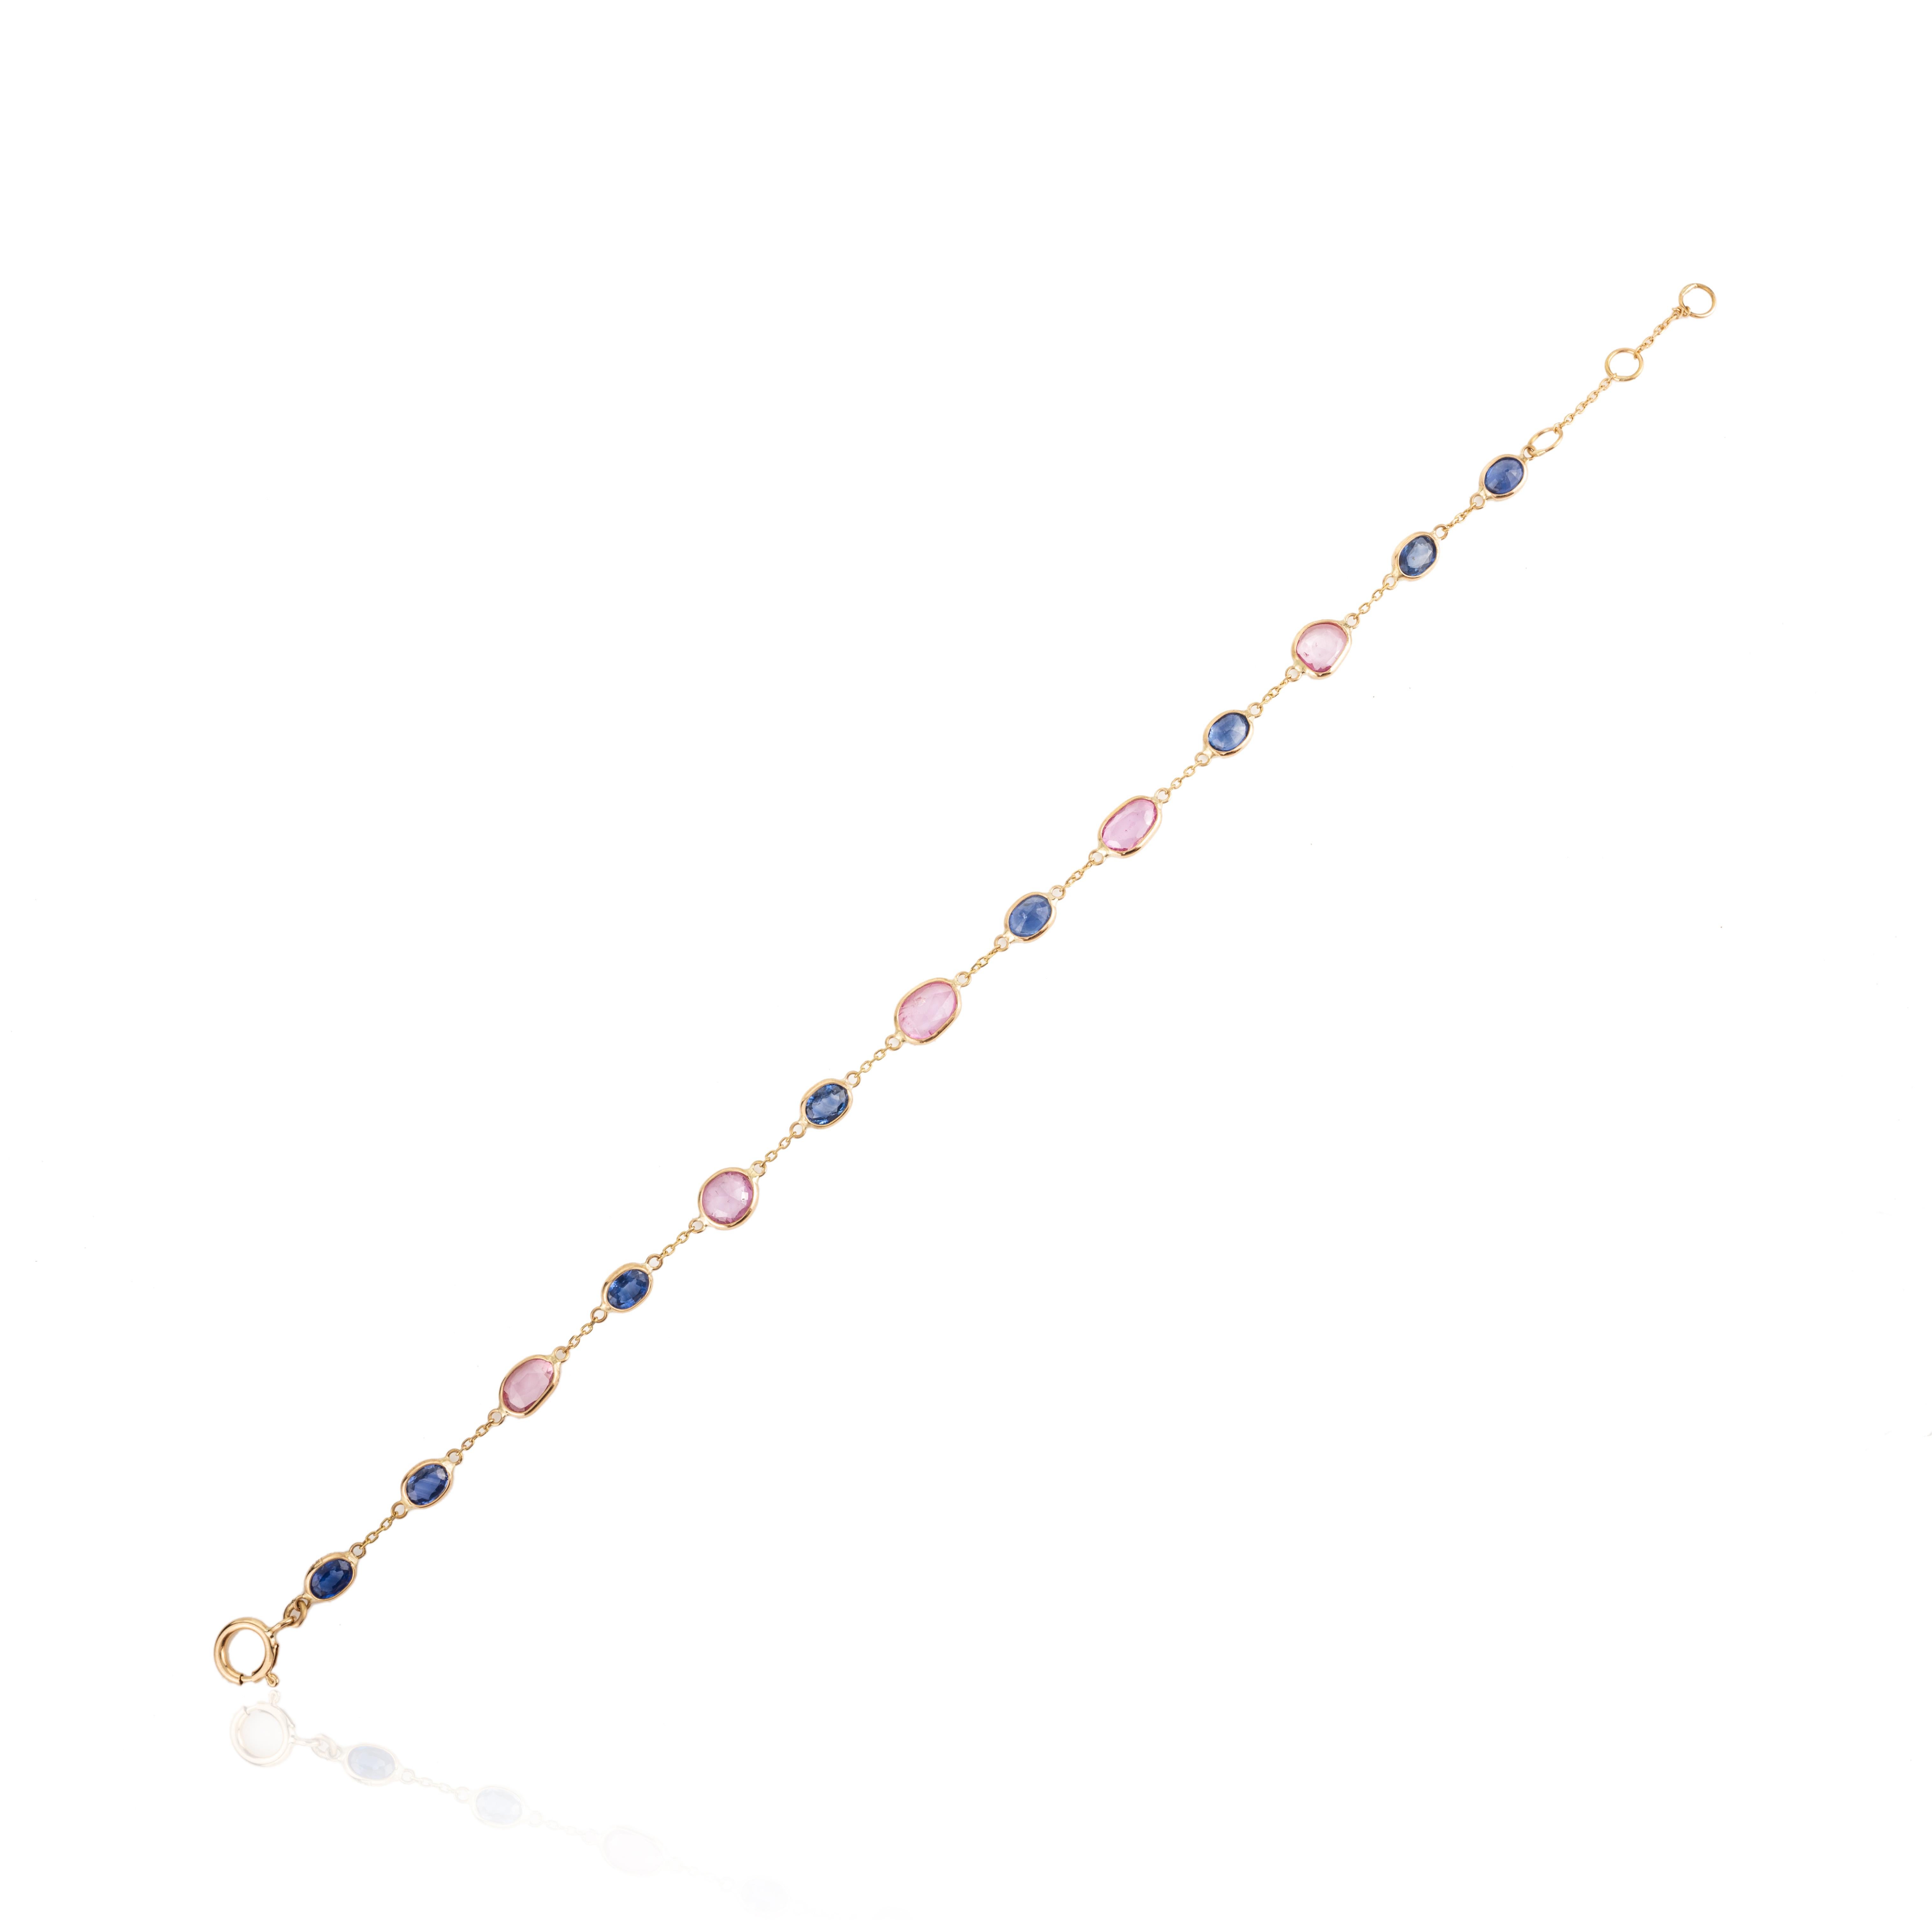 Modern 4.25 Carat Multi Sapphire Chain Bracelet Crafted in 18k Yellow Gold Settings For Sale